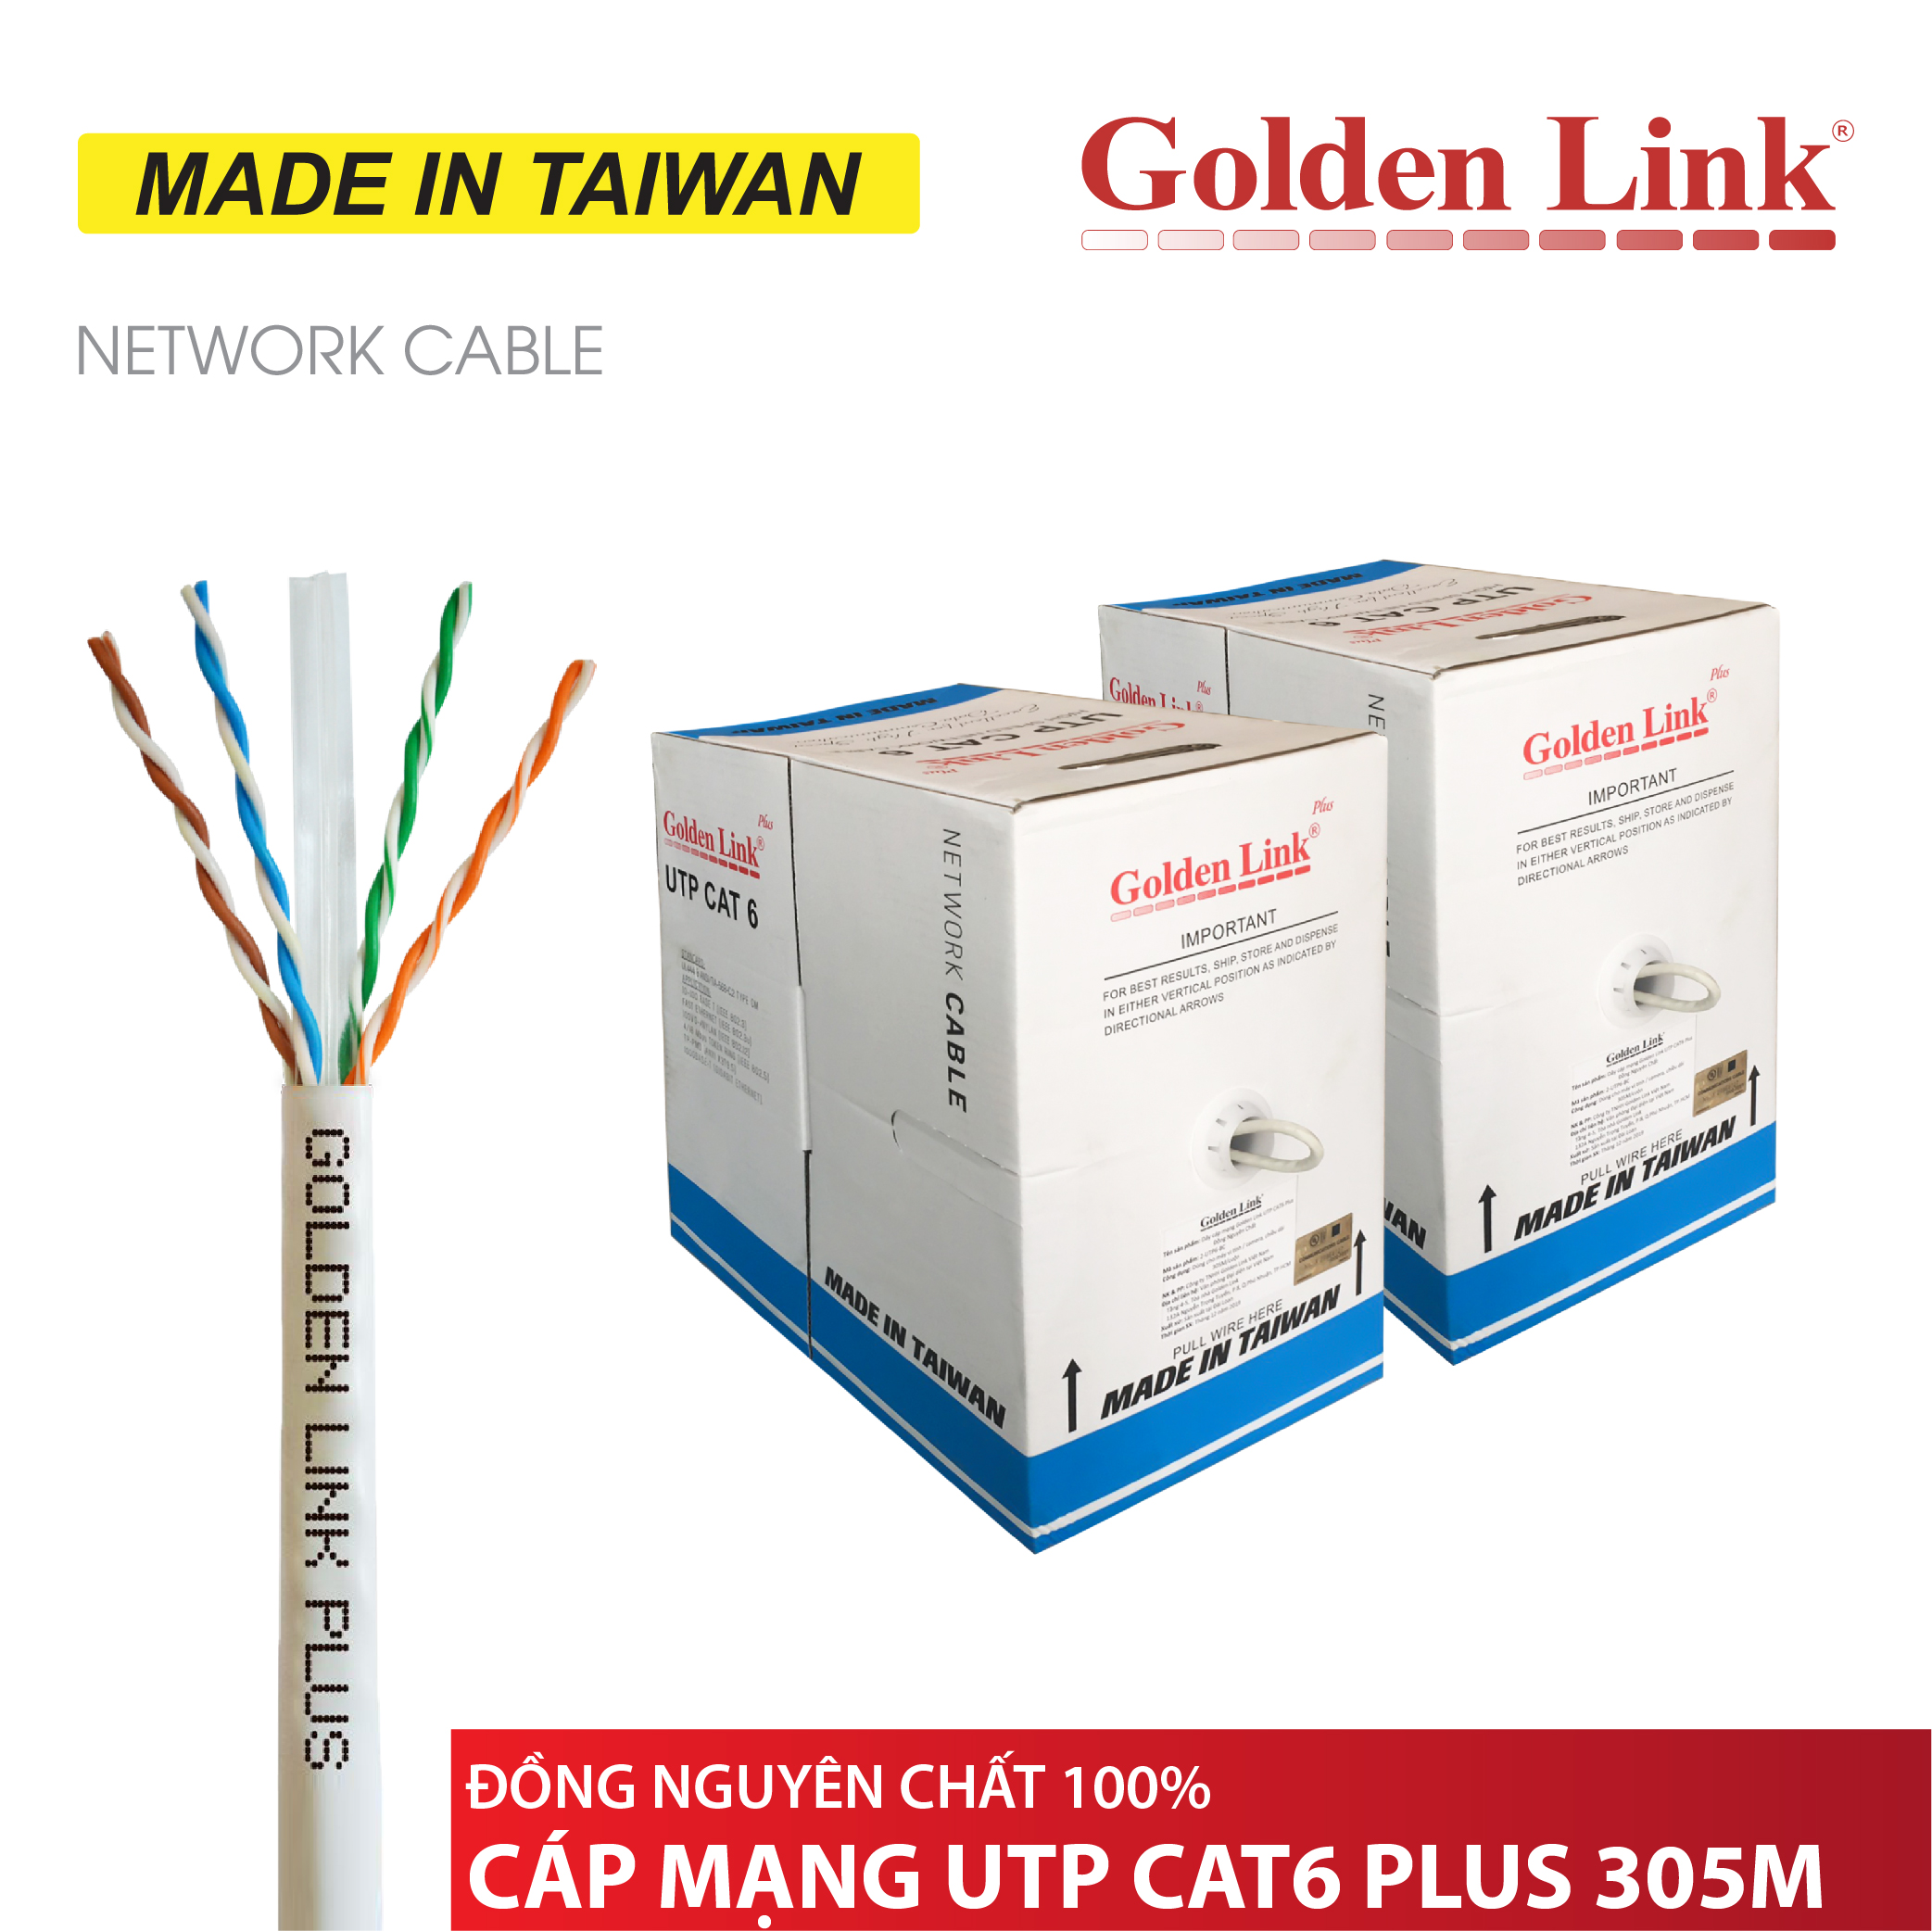 Golden Link Plus UTP CAT 6 Network Cable MADE IN TAIWAN